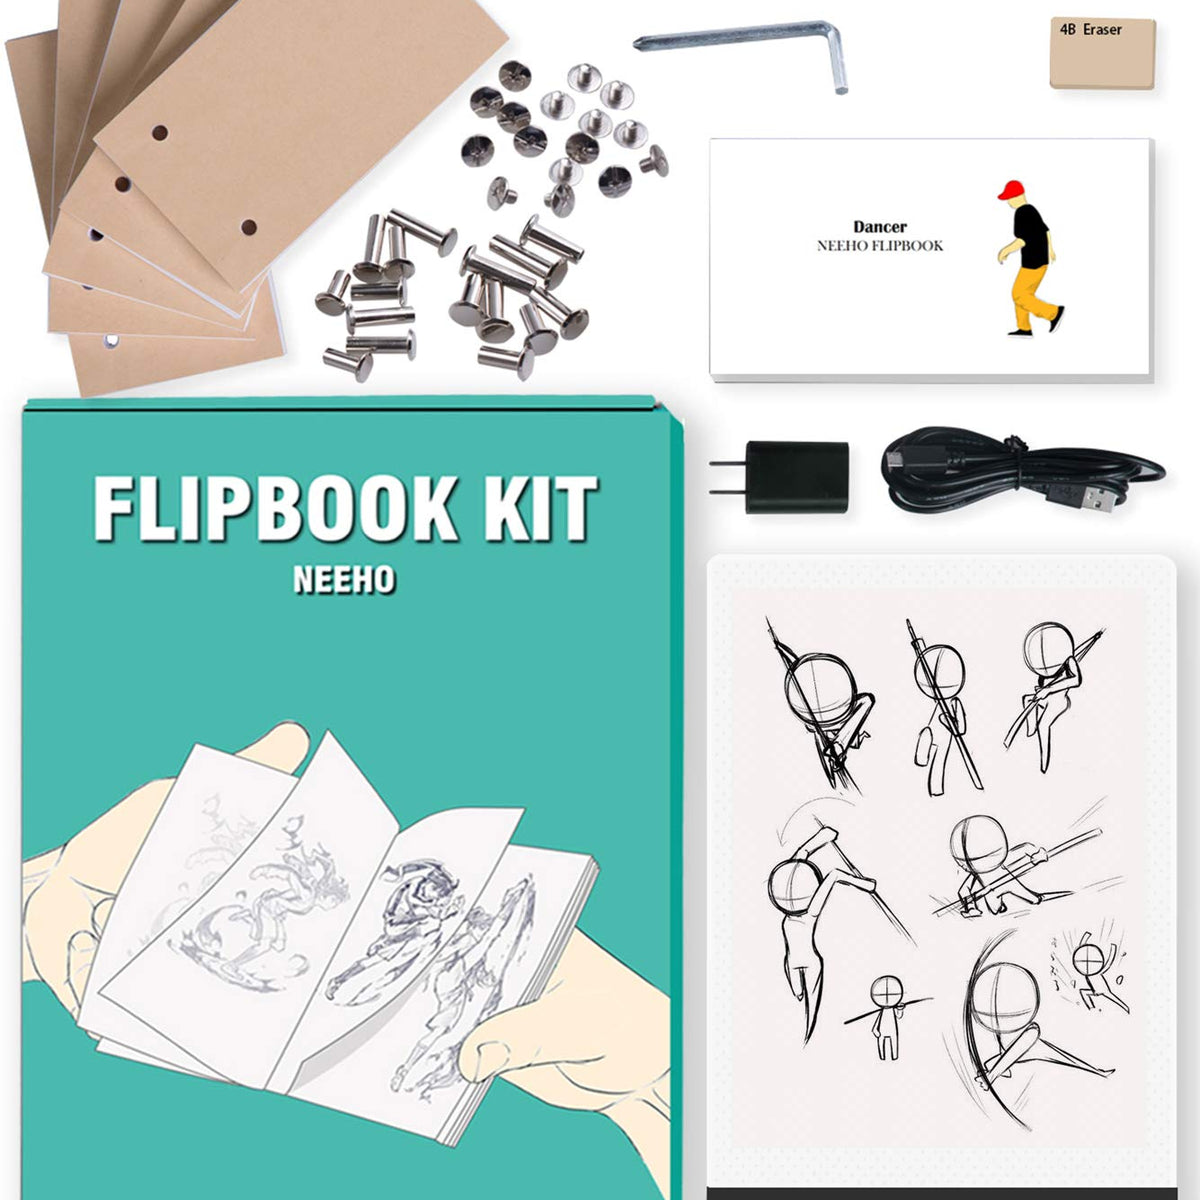 Official Andymation's Flipbook Kit for Kids & Adults with LED Light Pad for  Drawing & Tracing Animation, []